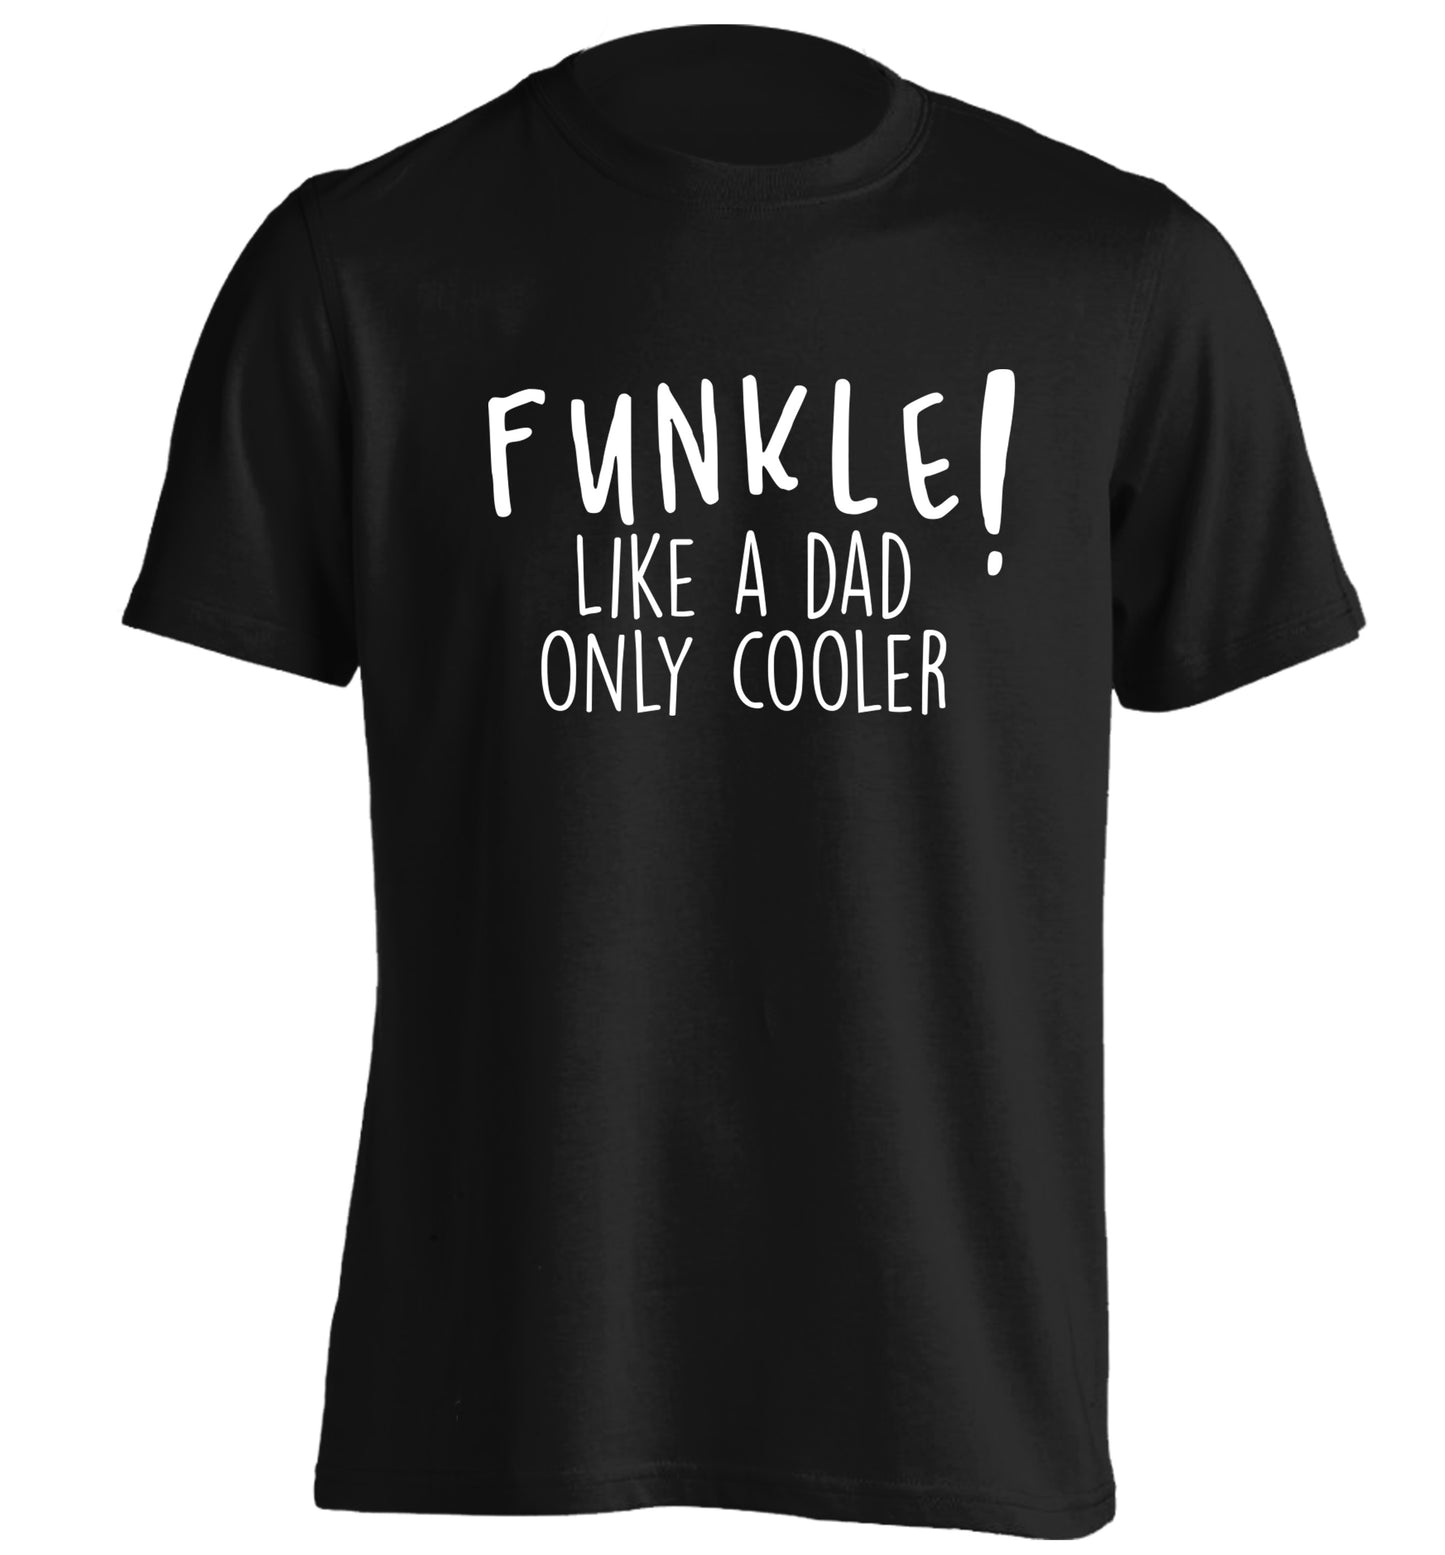 Funkle Like a Dad Only Cooler adults unisex black Tshirt 2XL